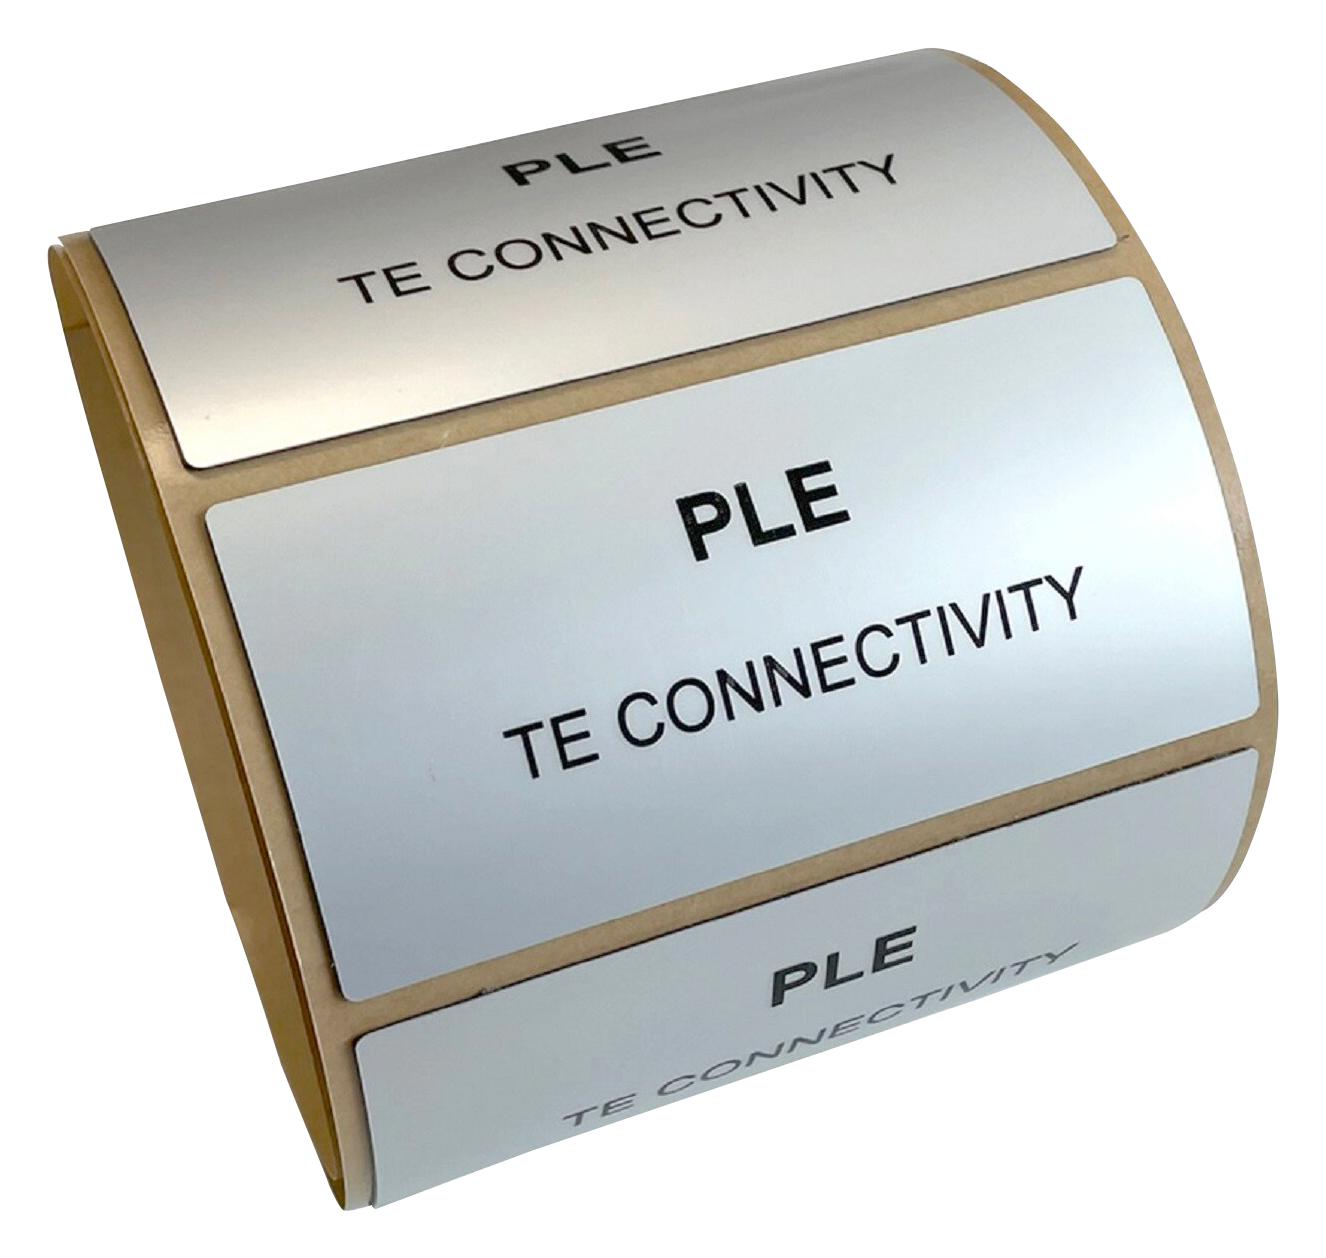 Entrelec TE Connectivity Ple-100050-Gy-0.25 Label, Polyester, Grey, 100mm X 50mm